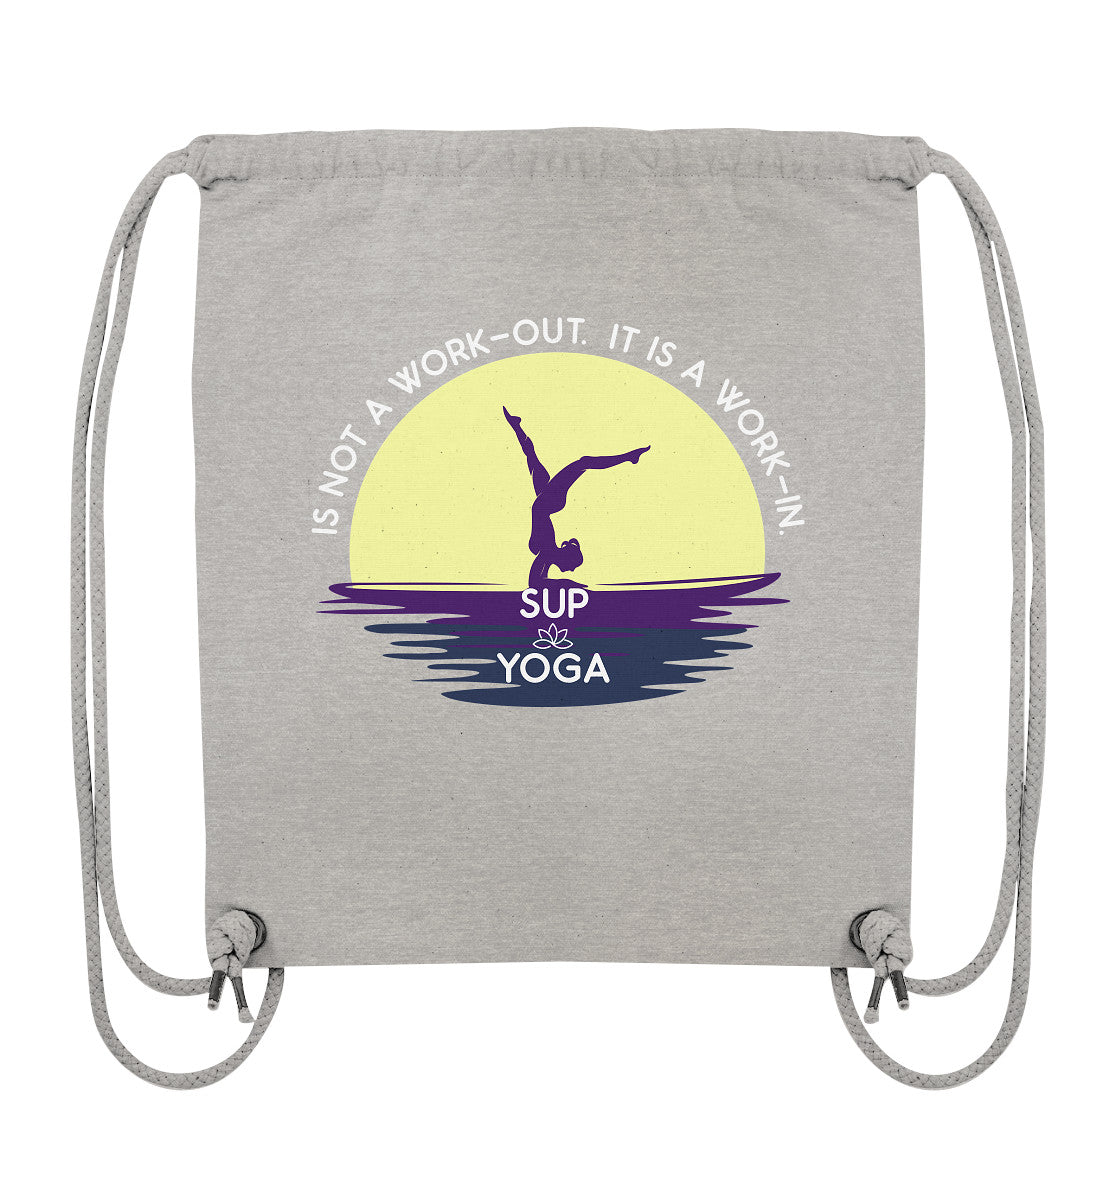 SUP YOGA IS NOT A WORK-OUT.  IT IS A WORK-IN.  - Organic Gym-Bag